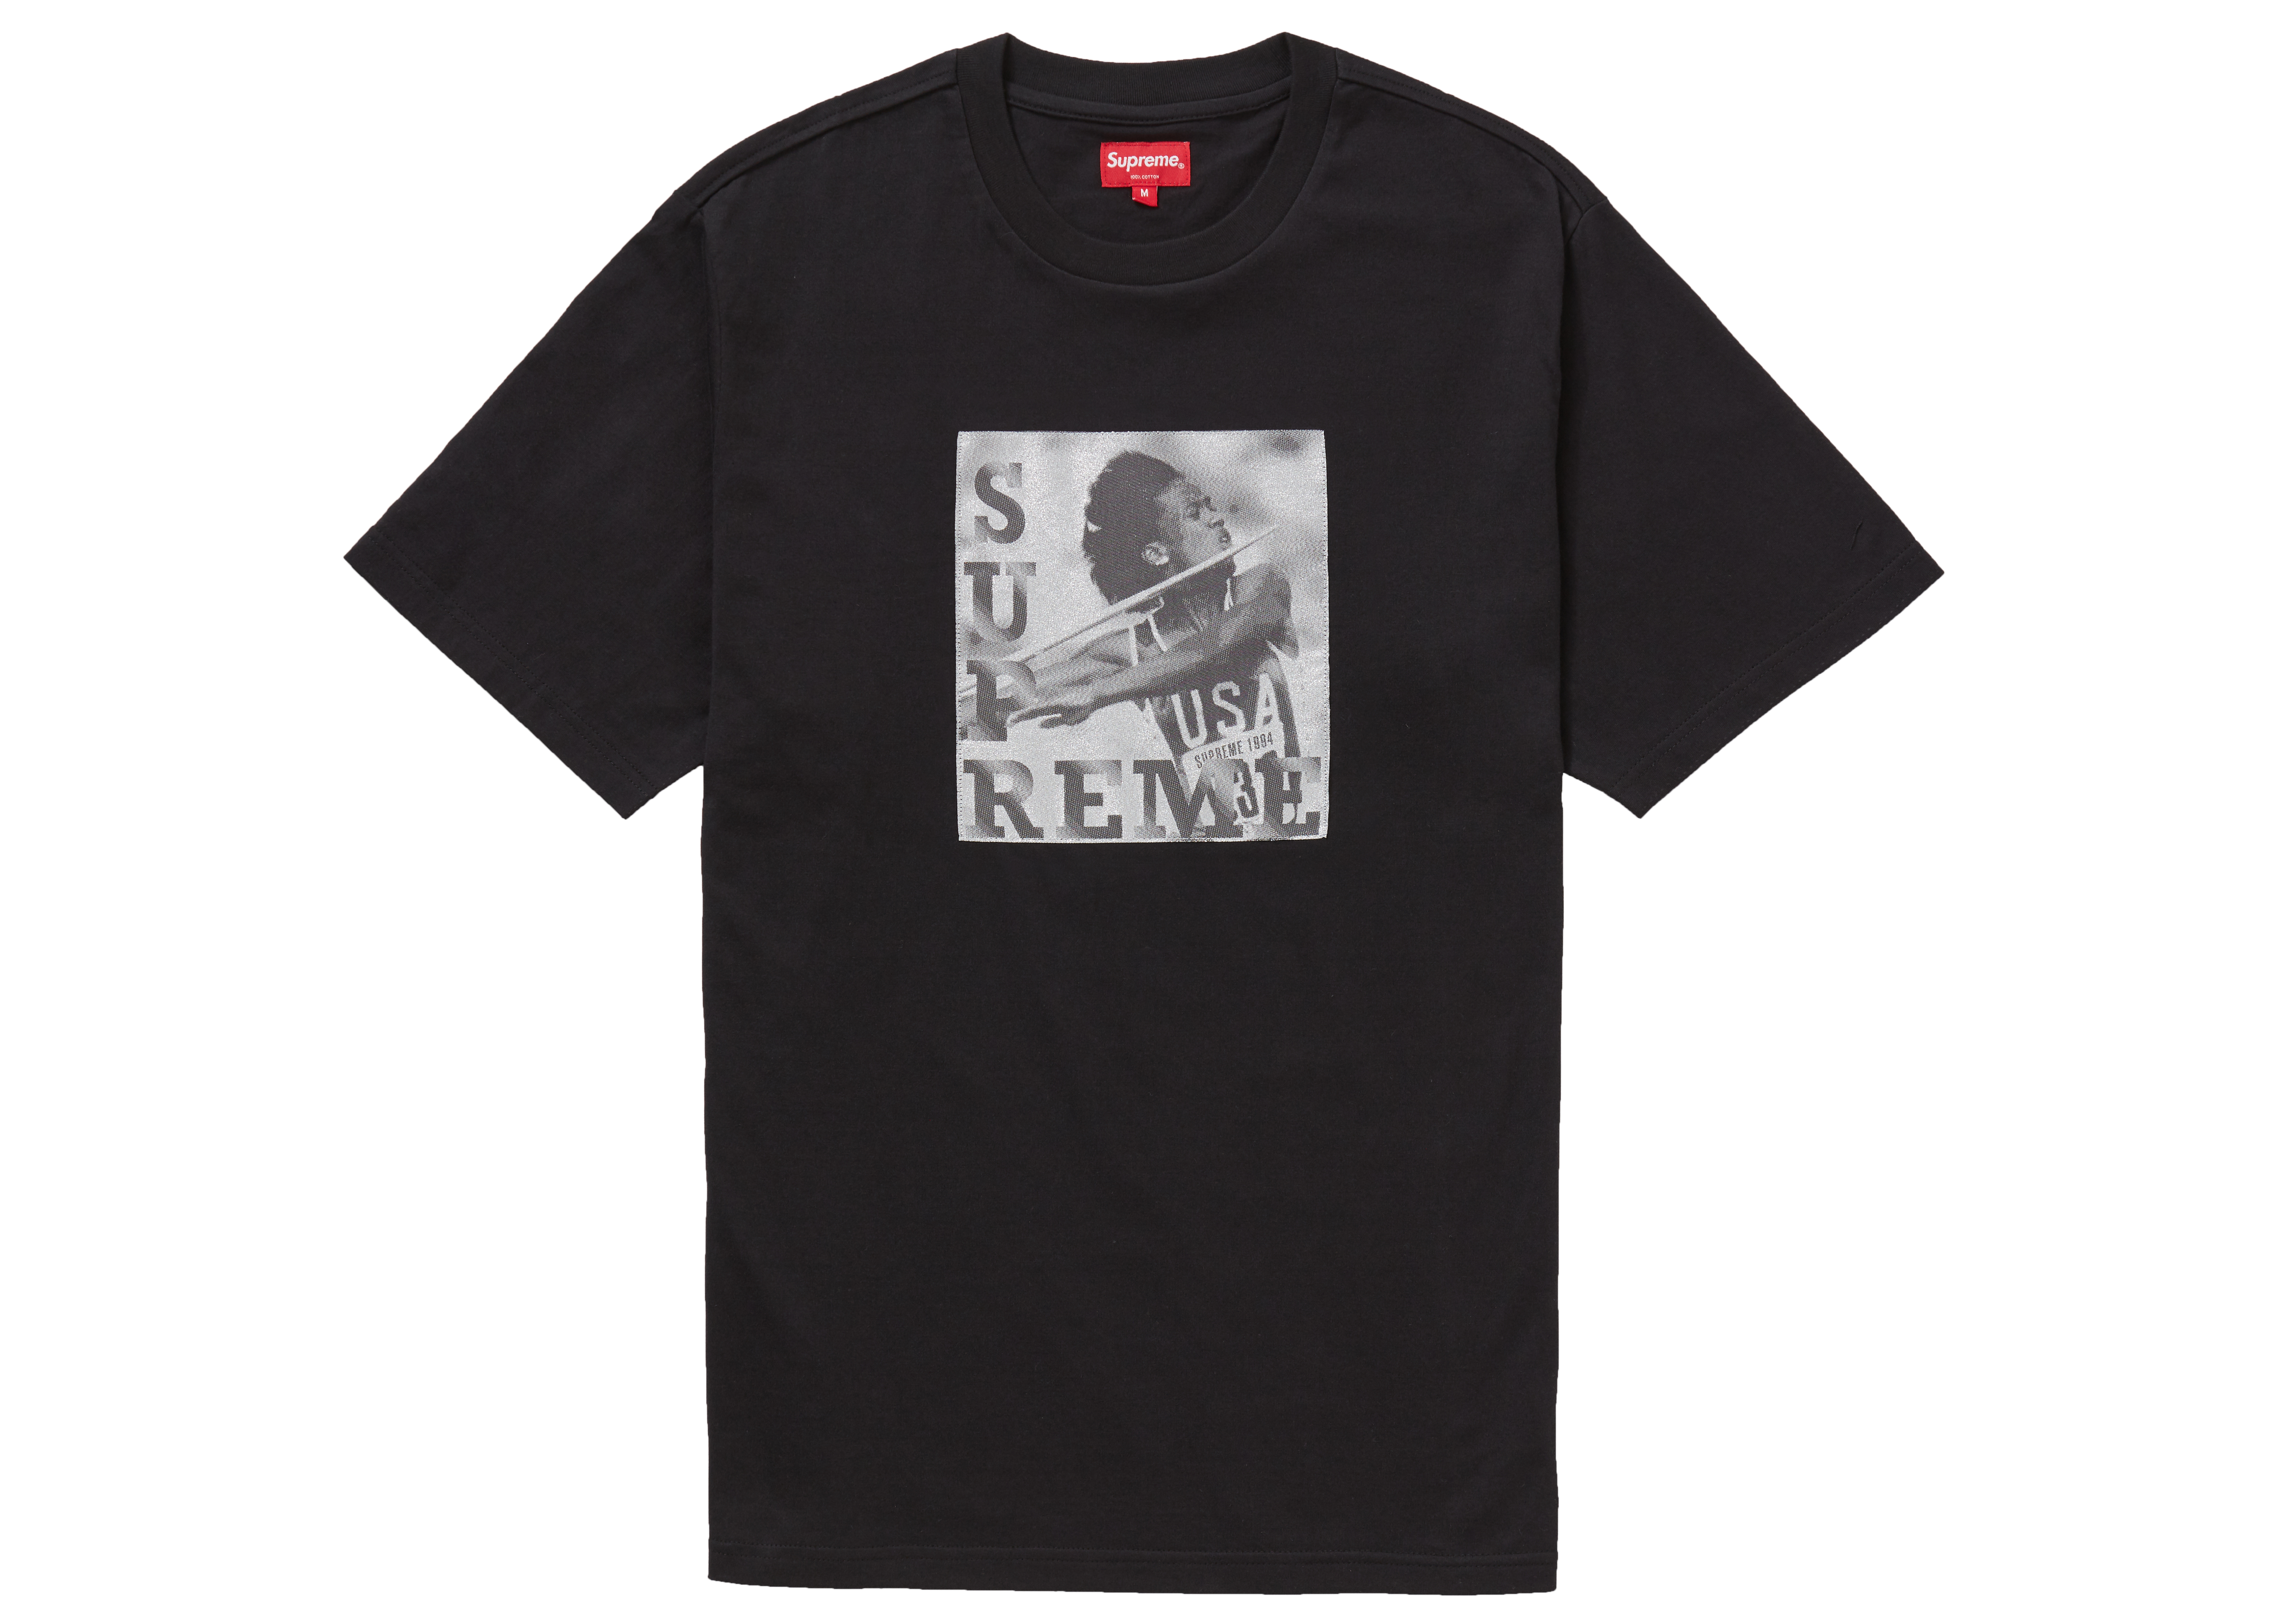 【NEW好評】Supreme Javelin Label S/S Top L size Tシャツ/カットソー(半袖/袖なし)